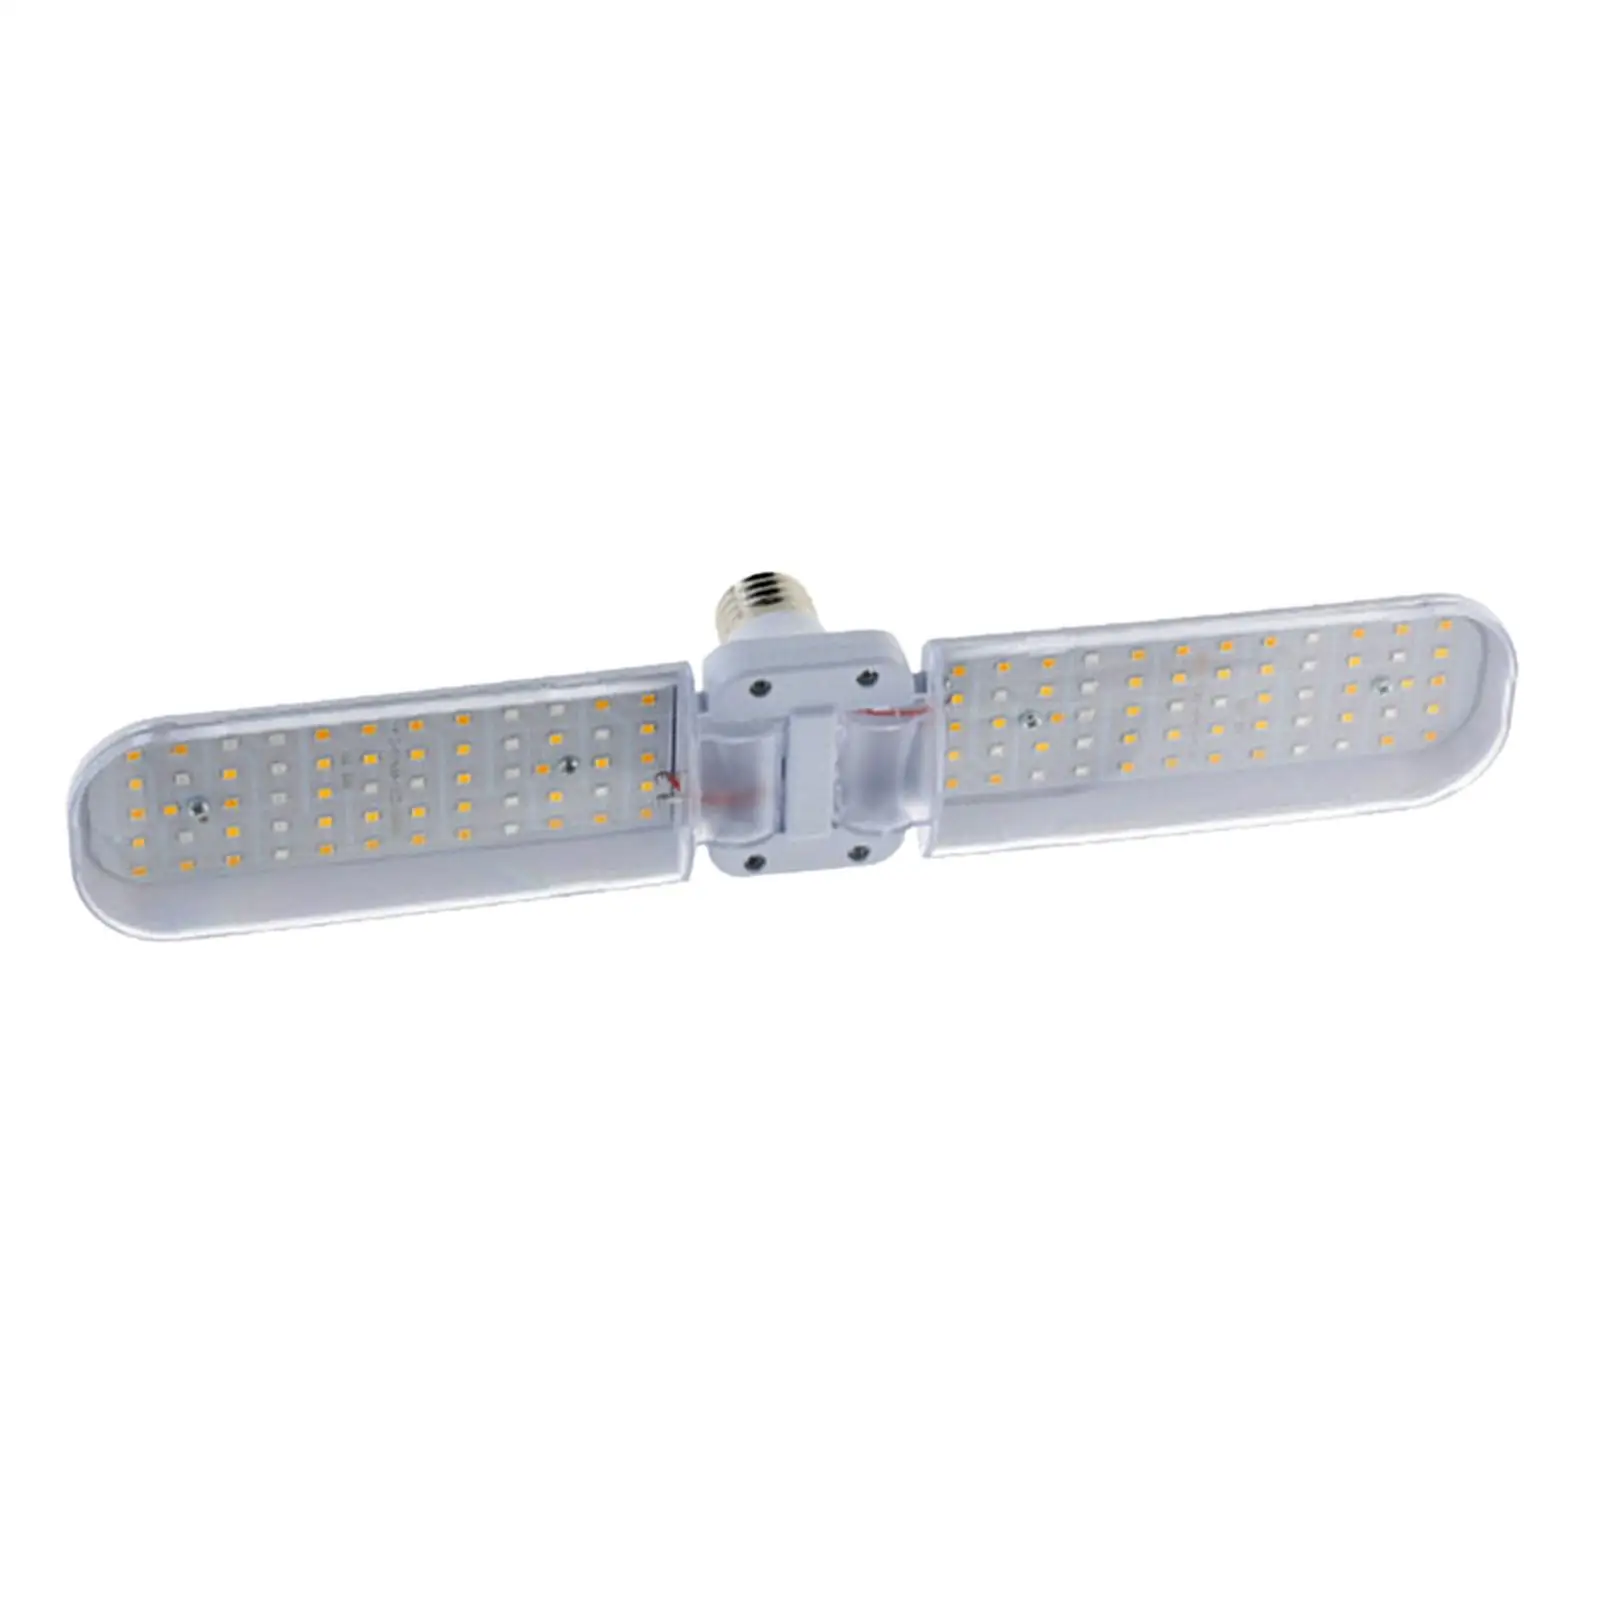 LED Foldable Grow Light Growing Lamp E27 Base Full Spectrum Grow Bulb for Plant Succulent Seed Vegetables Greenhouse